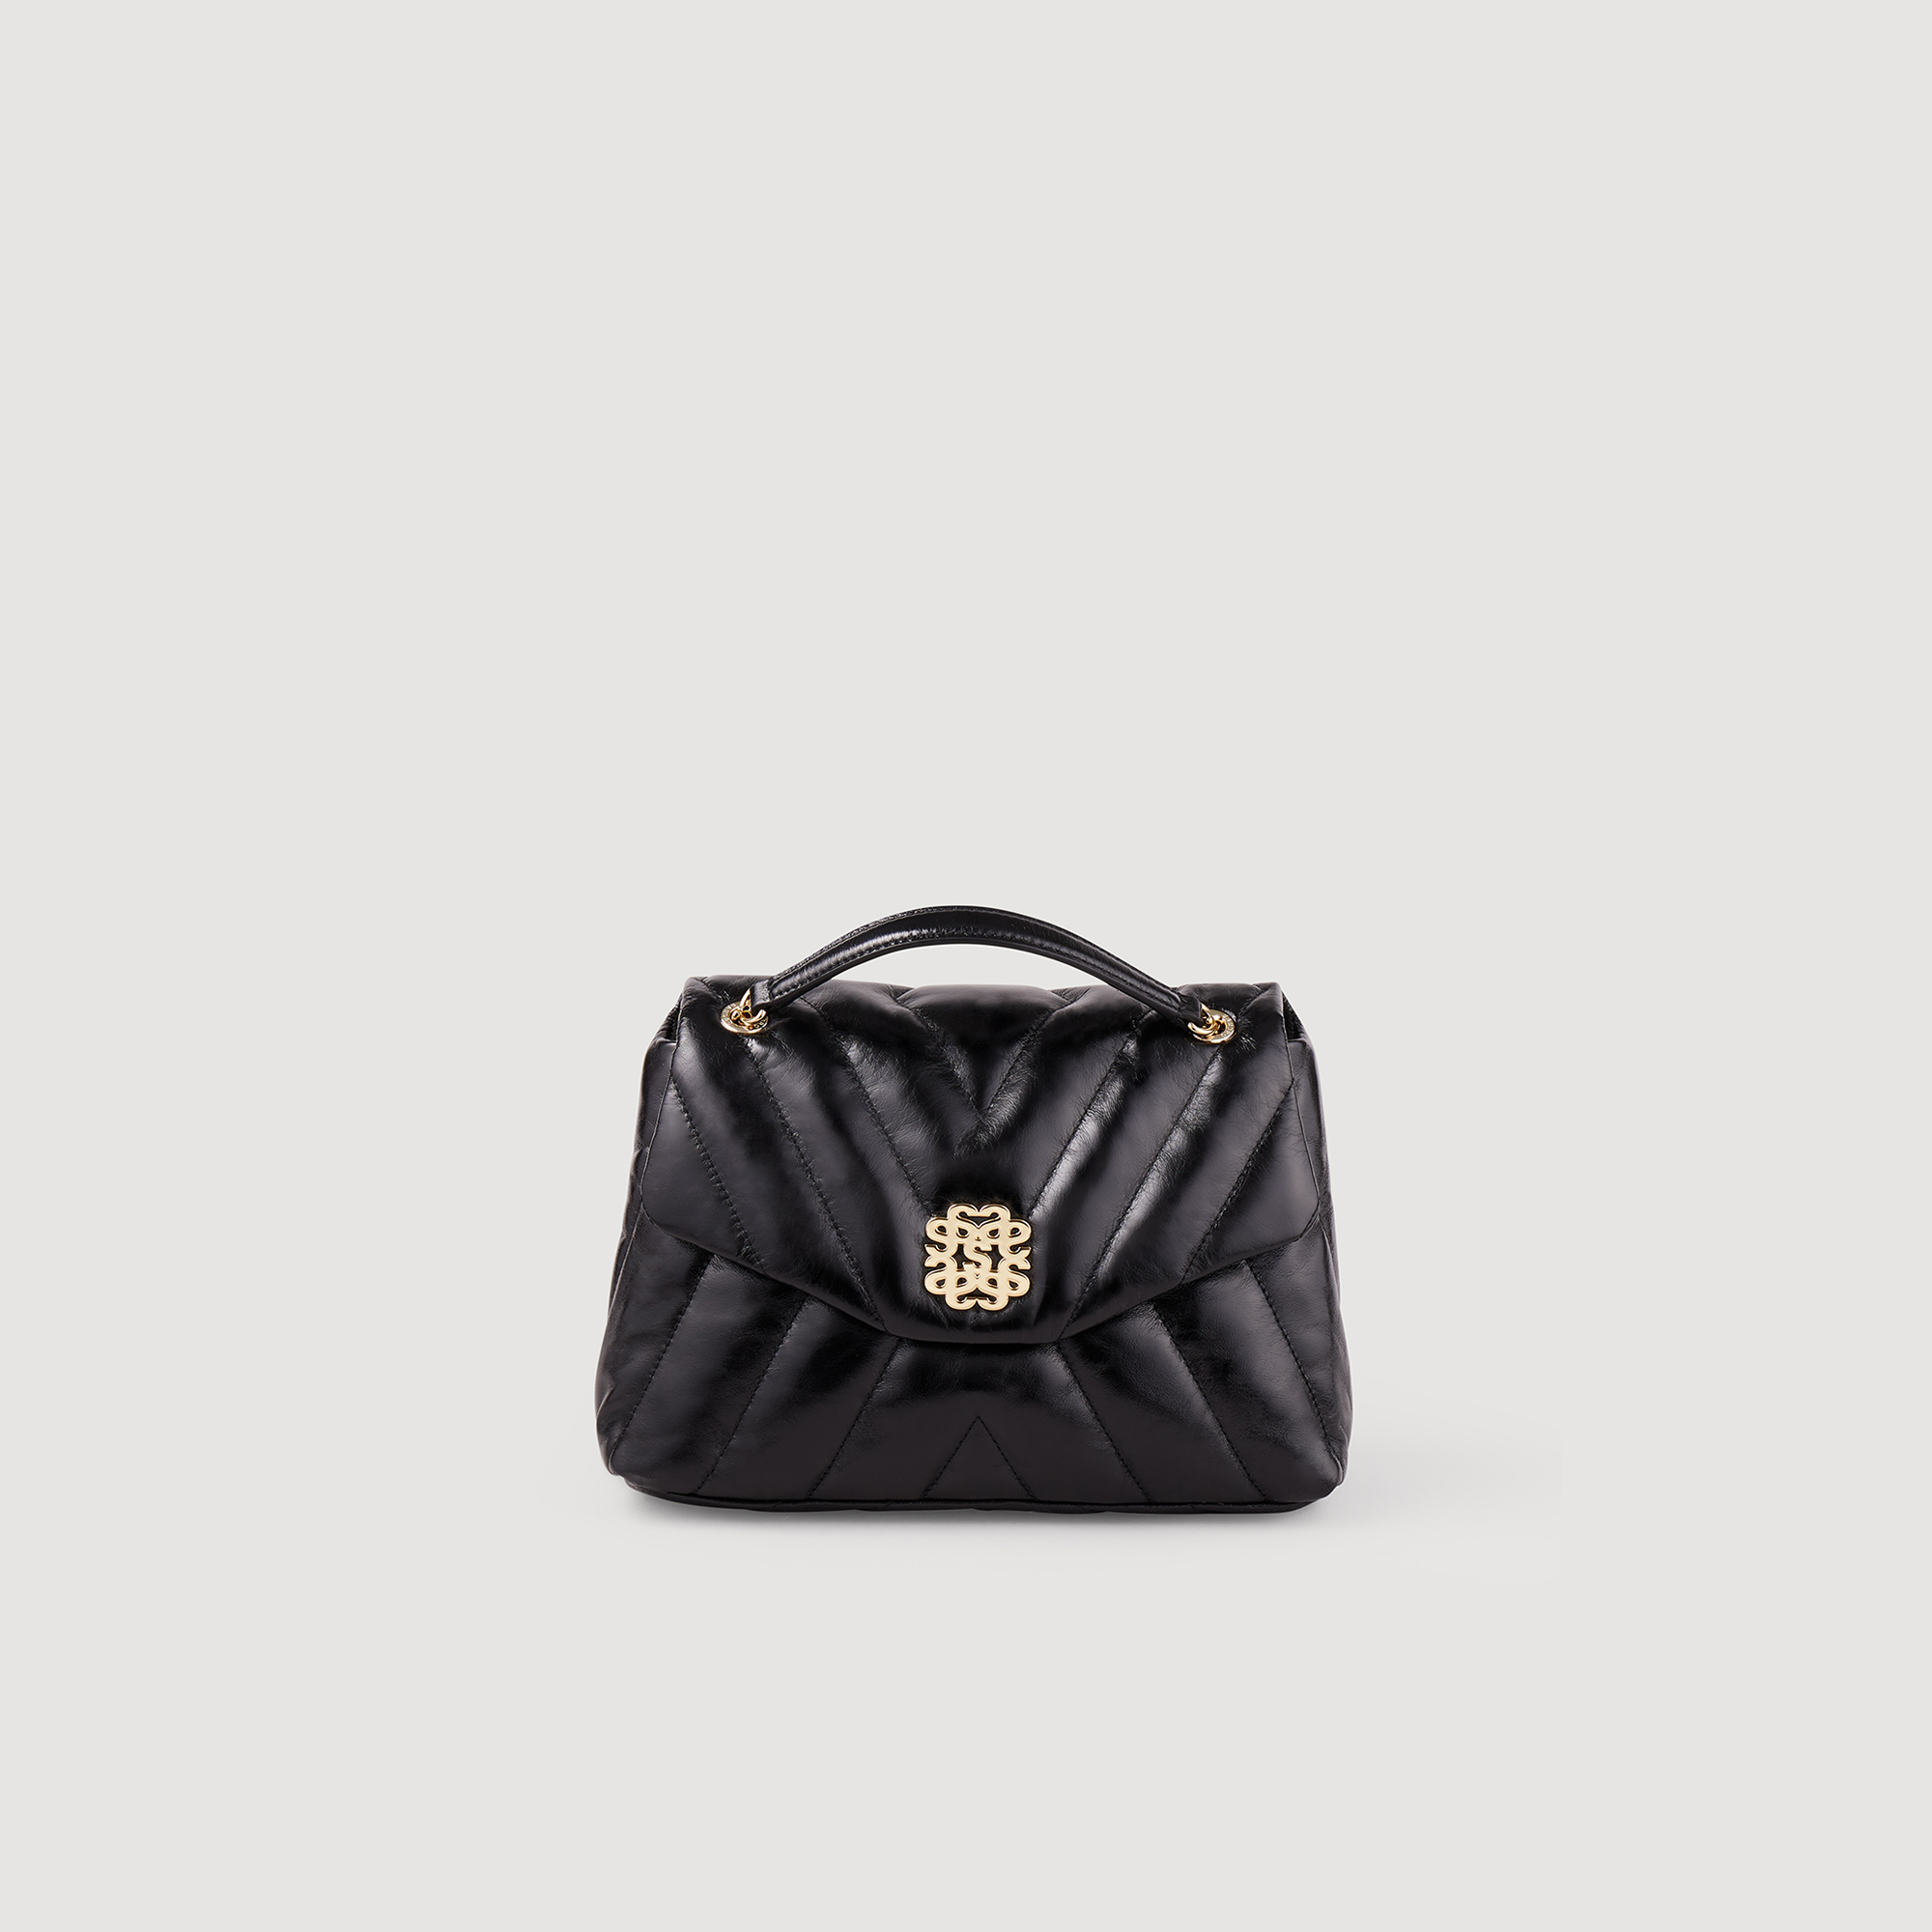 Sandro cotton Leather: cow Flap lining: Quilted textured leather bag with a flap, a graphic signature clasp, and a chain strap with leather reinforcement for carrying the accessory on the shoulder or across the body